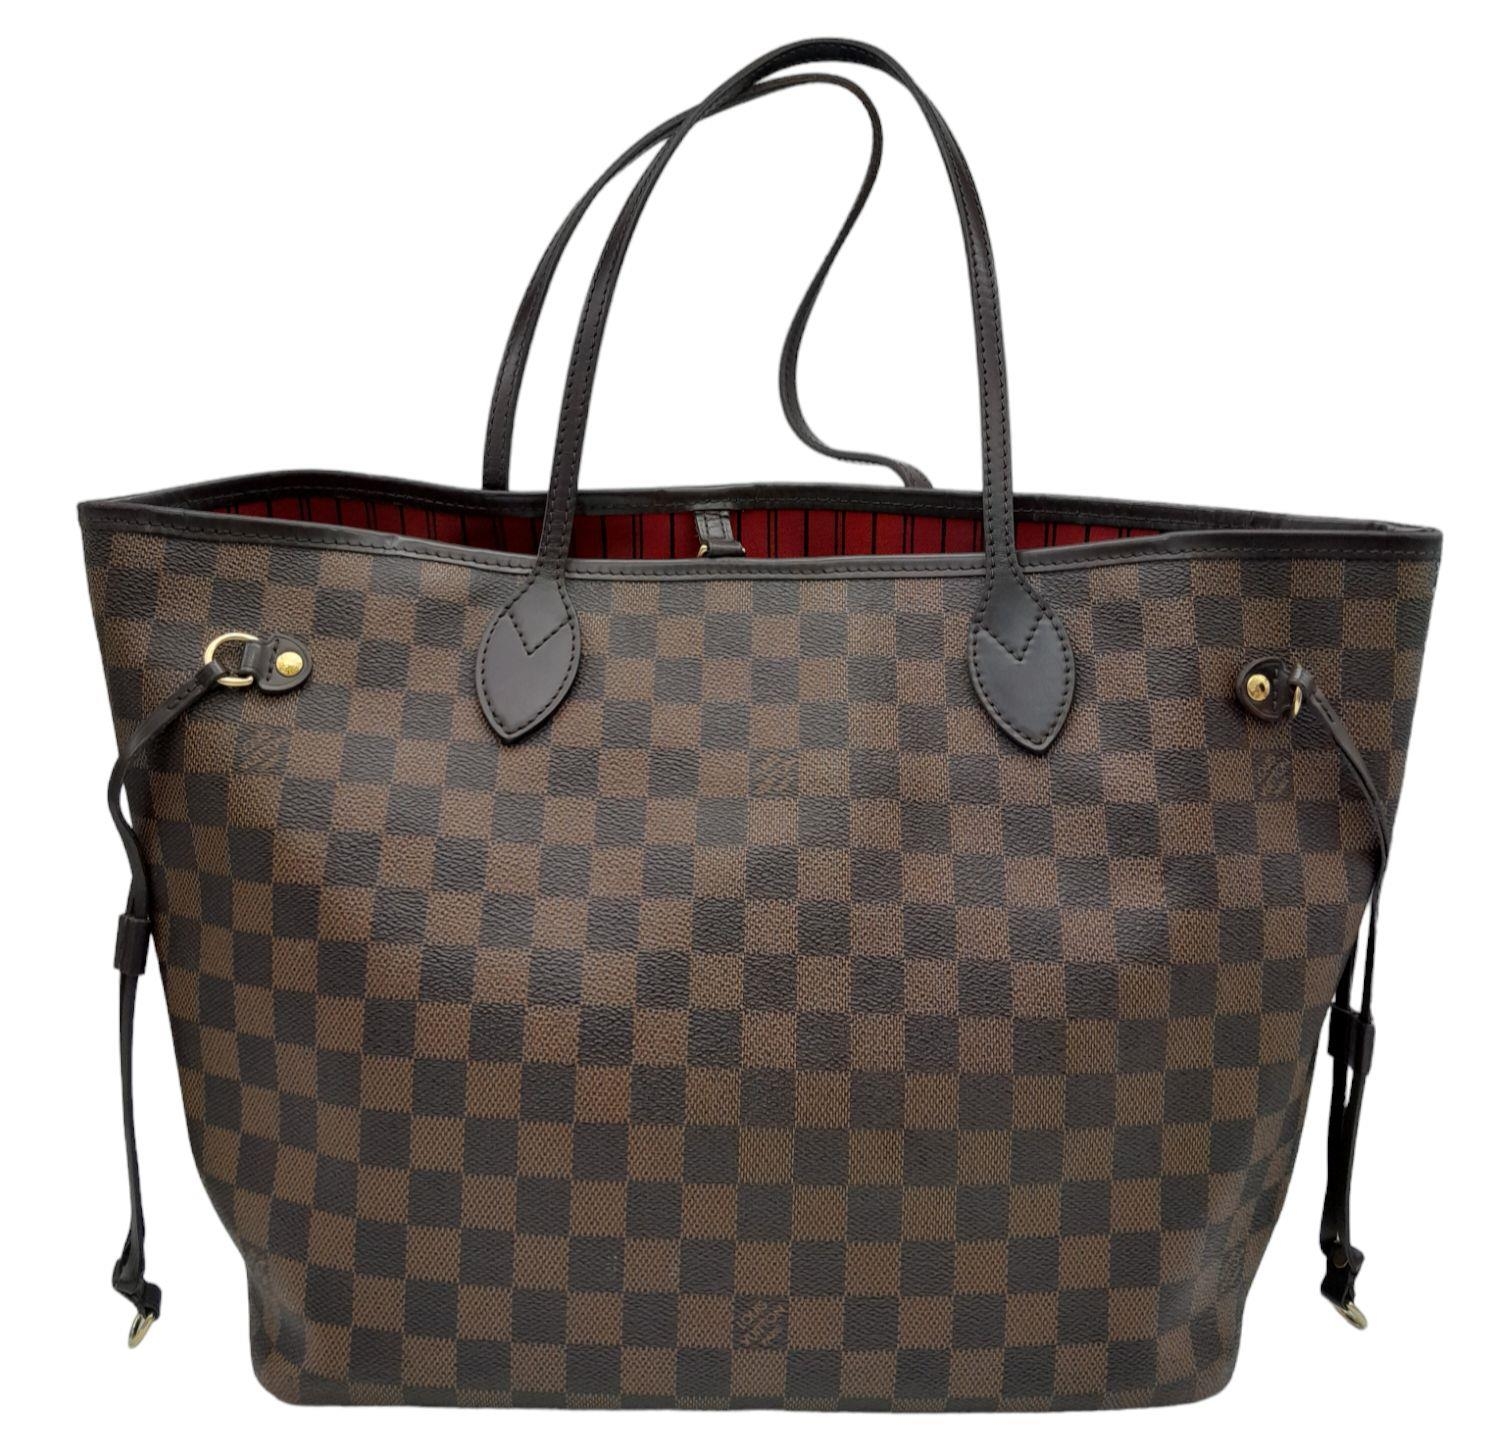 A Louis Vuitton Neverfull Damier Ebene Bag. Coated canvas exterior with leather trim, gold-toned